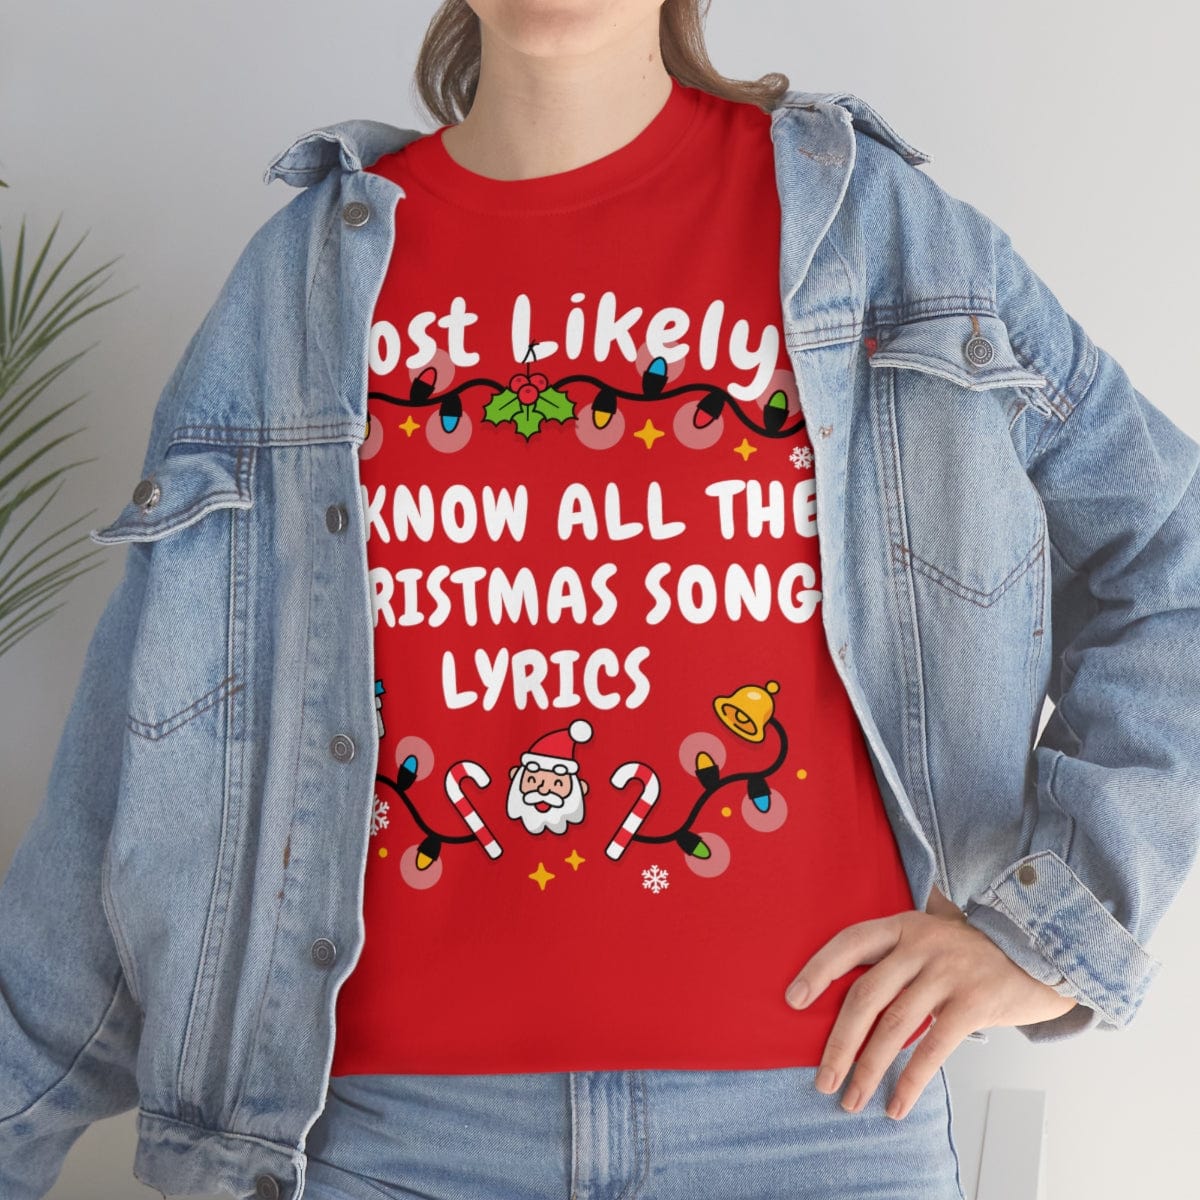 TO KNOW ALL THE CHRISTMAS SONG LYRICS